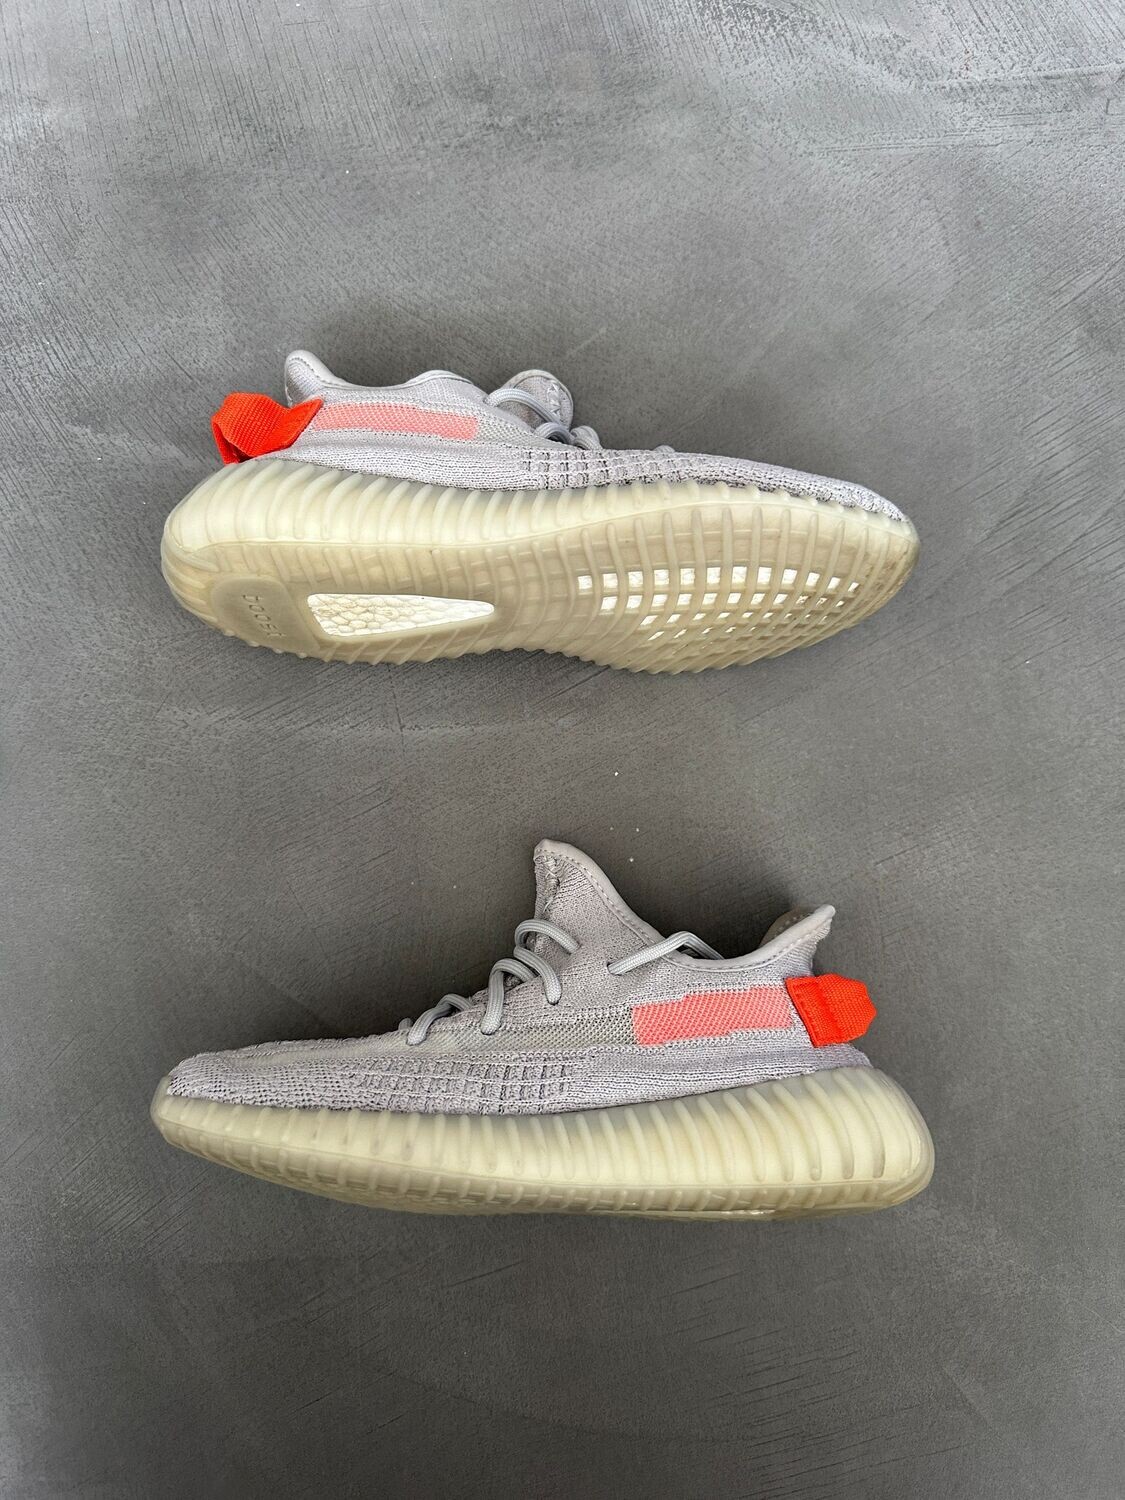 Yeezy Boost 350 Tail Light - USED